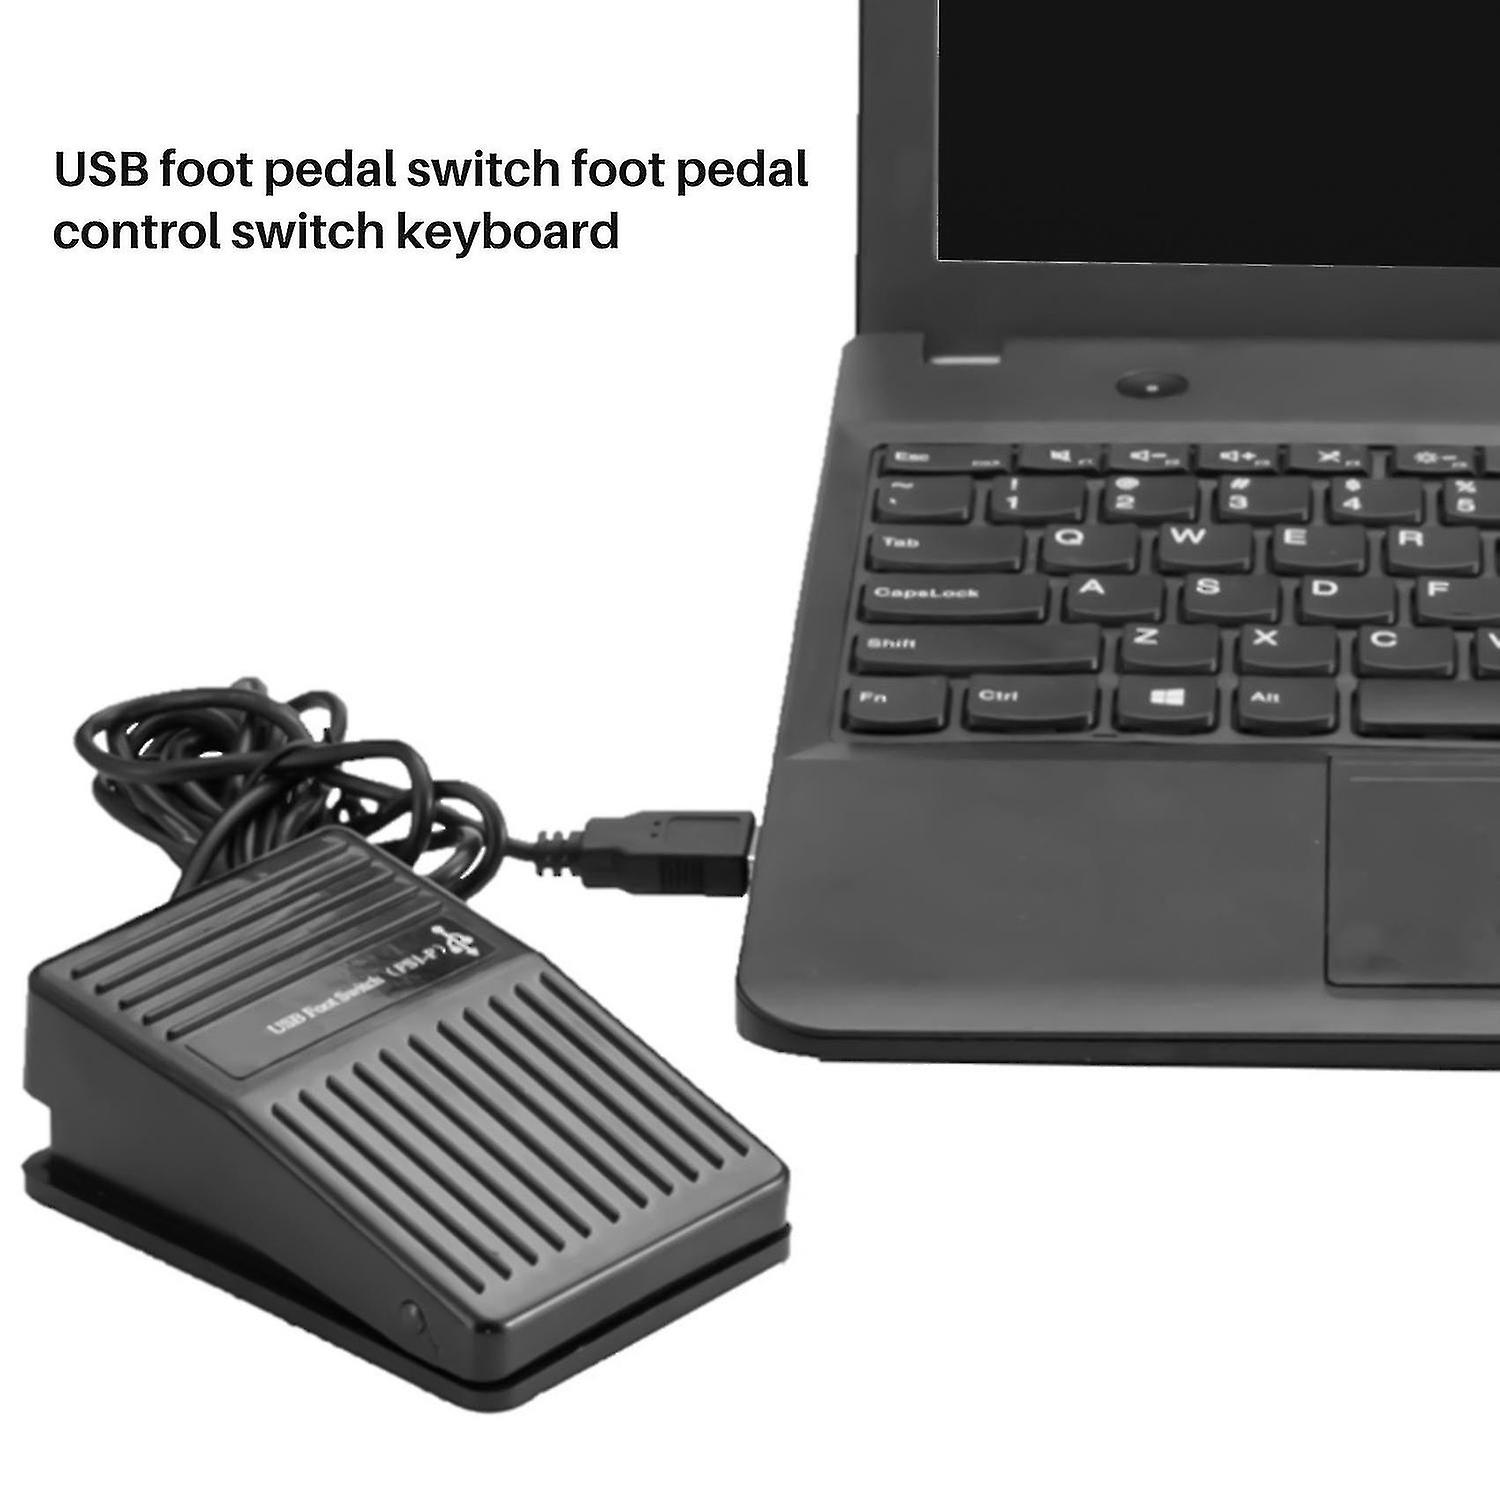 Usb Foot Pedal Switch Control Keyboard Action For Pc Computer Games New Foot Switch Usb Hid Pedal